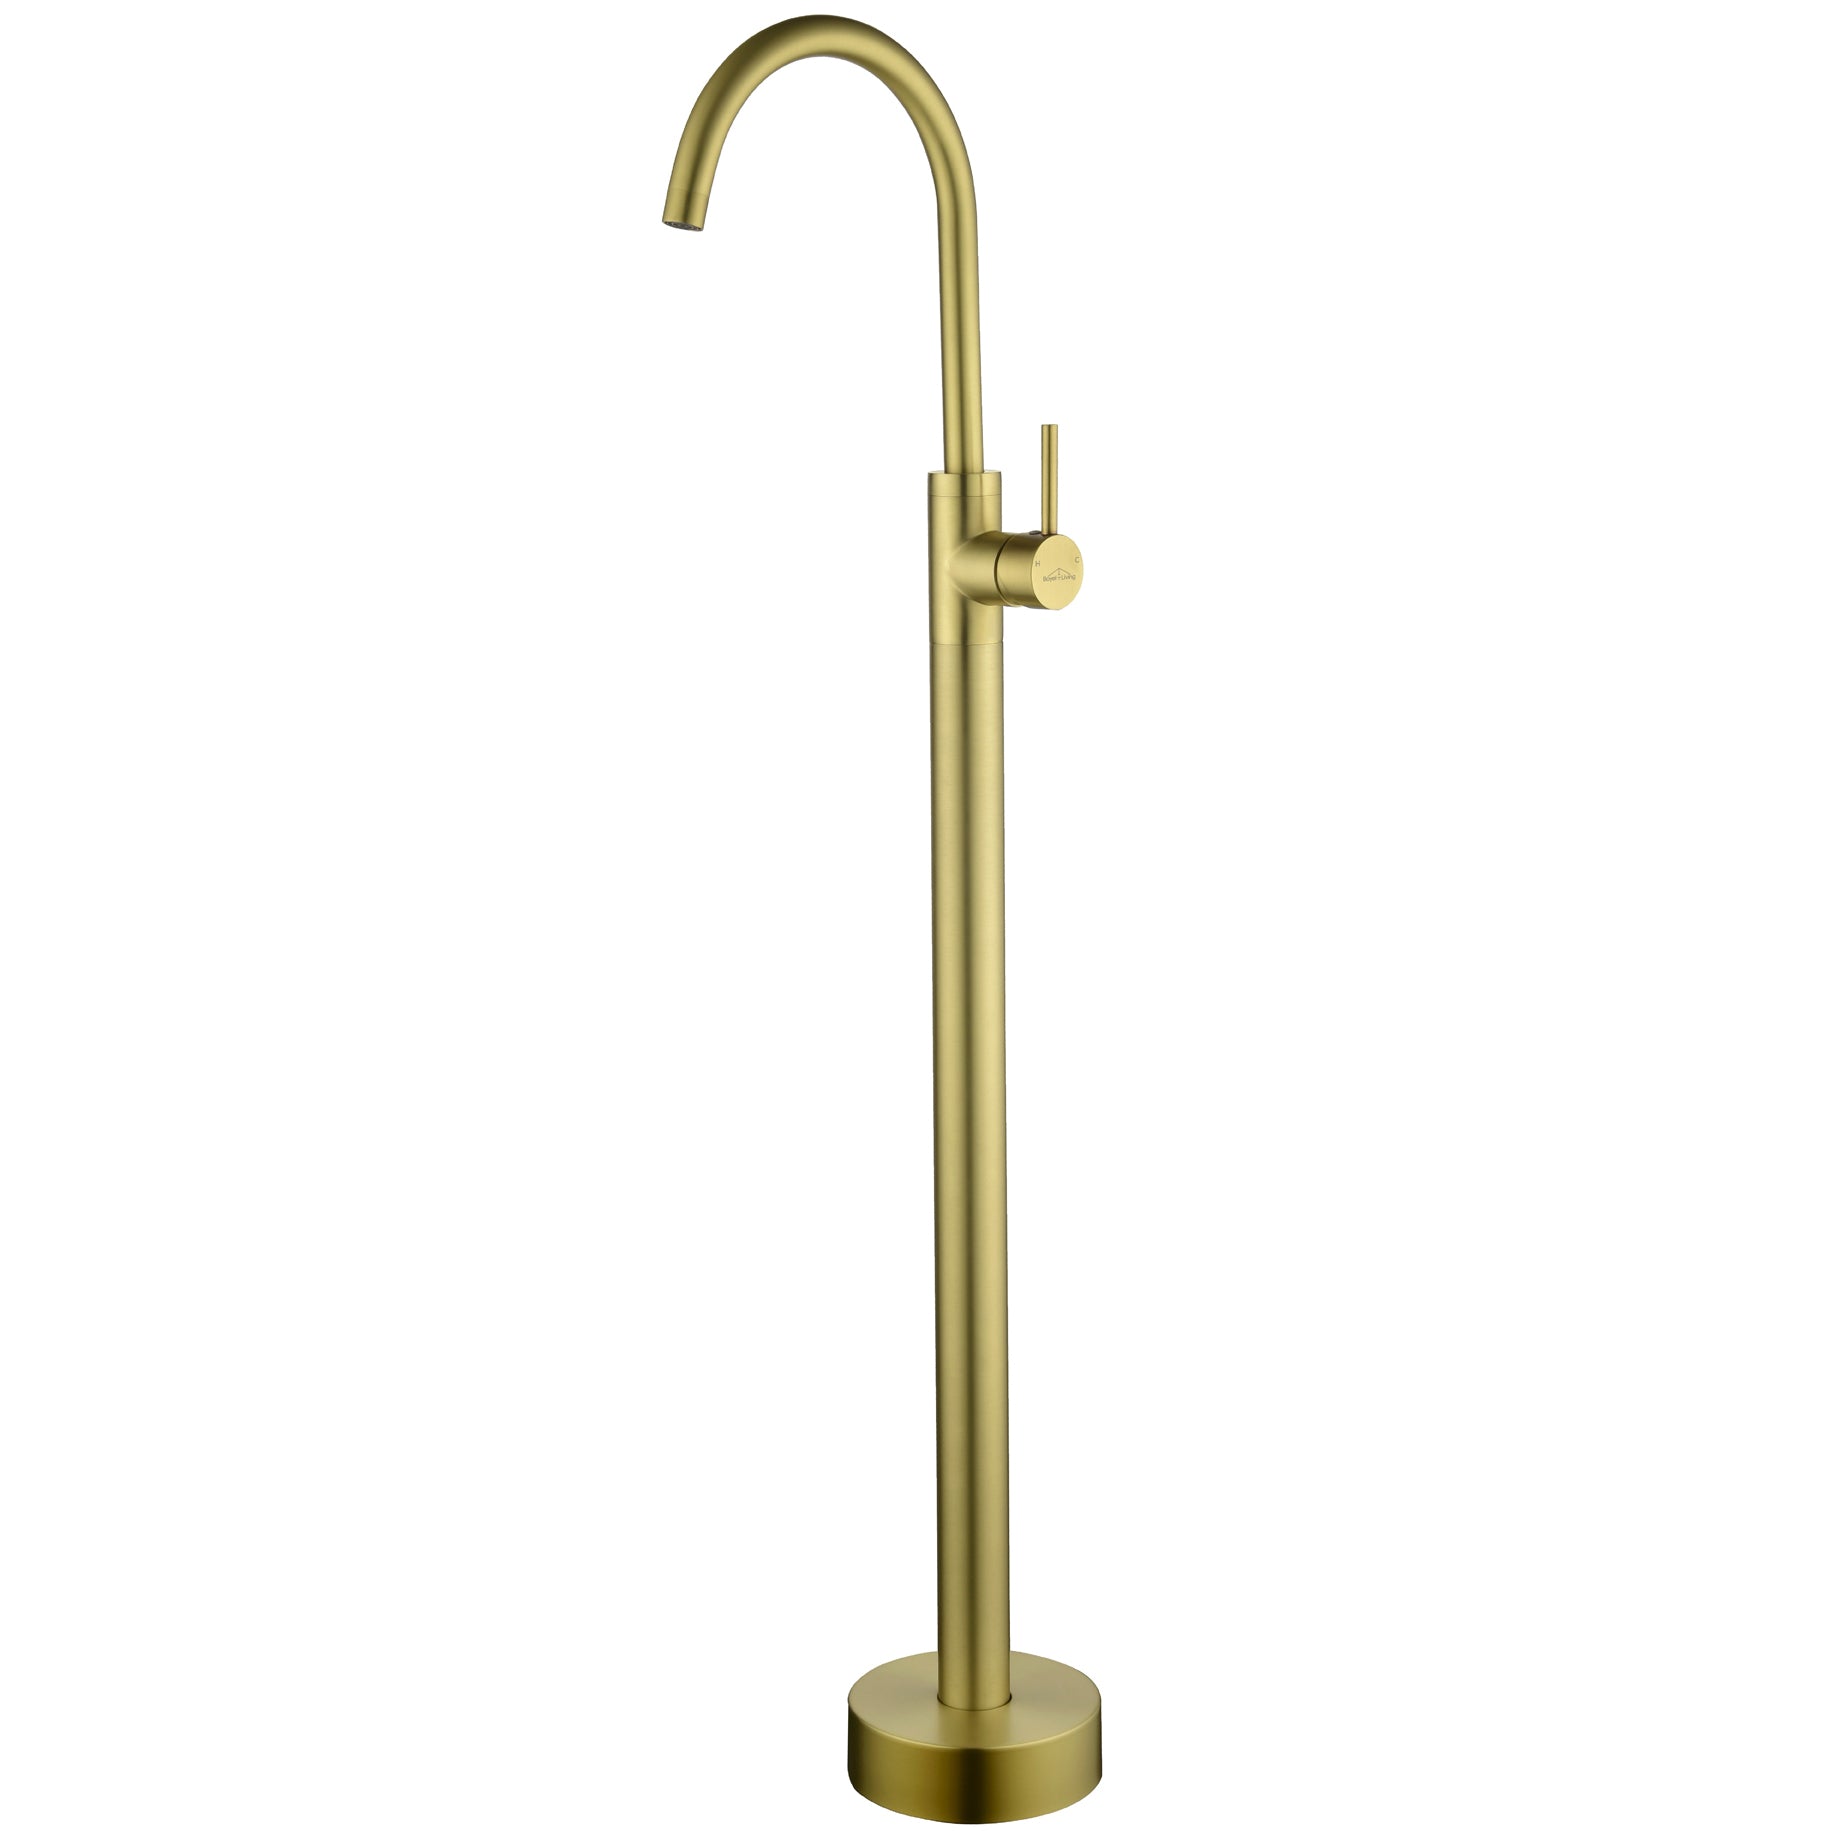 Boyel Living Freestanding Floor Mount Single Handle Bath Tub Filler Faucet with Water Supply Lines in Brushed Gold-Boyel Living